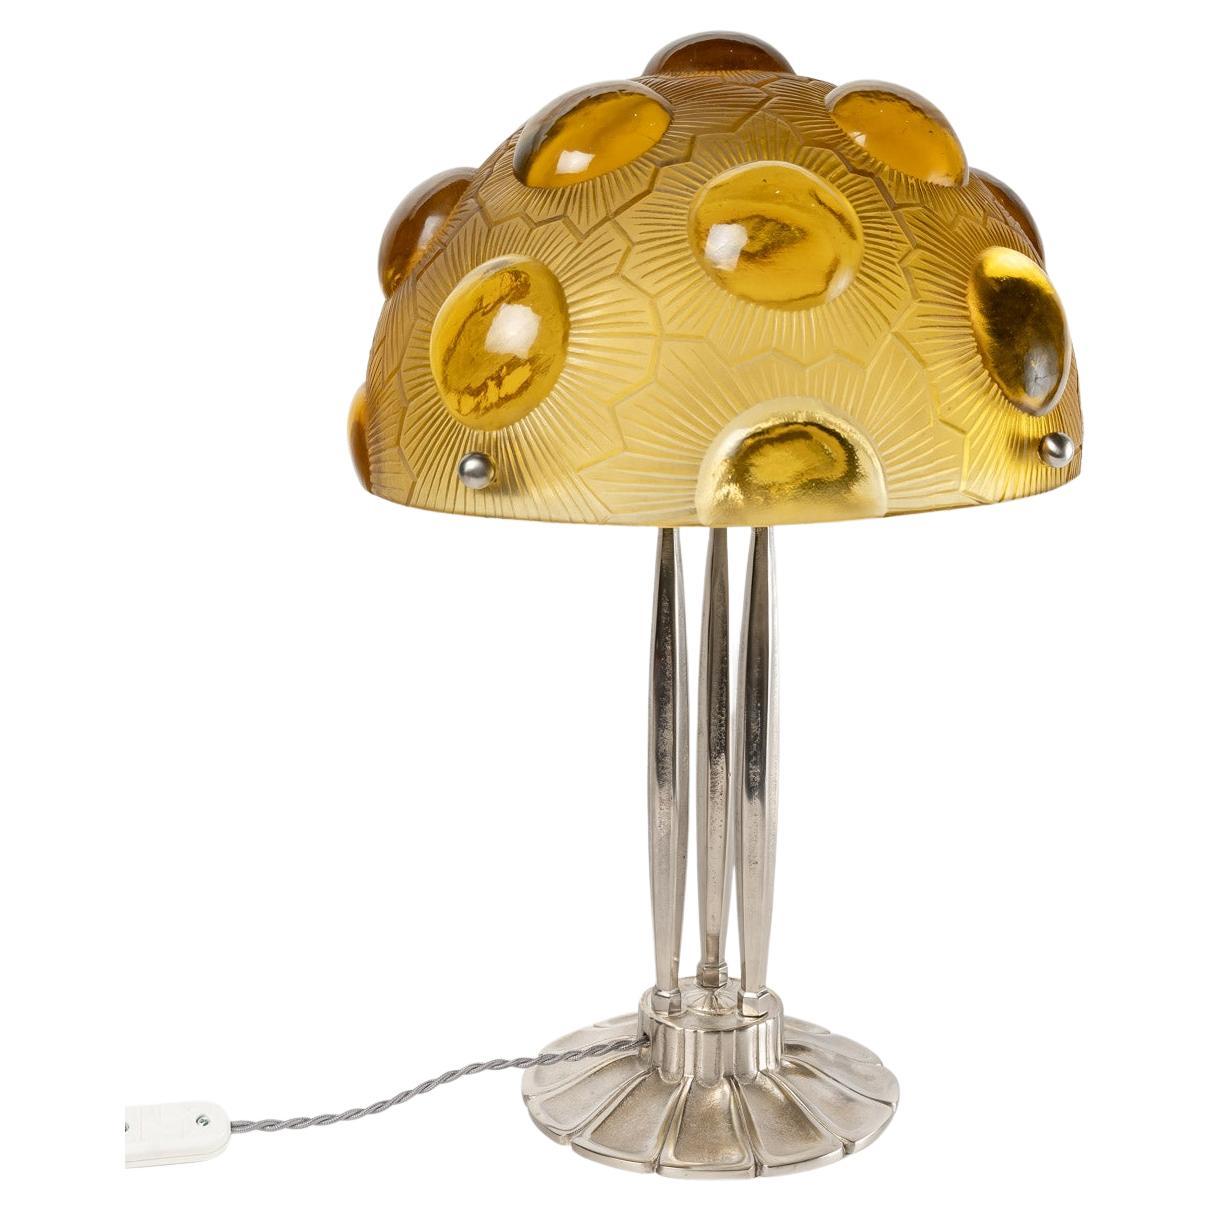 1926 René Lalique, Lamp Soleil Amber Yellow Glass and Nickel Plated Bronze For Sale